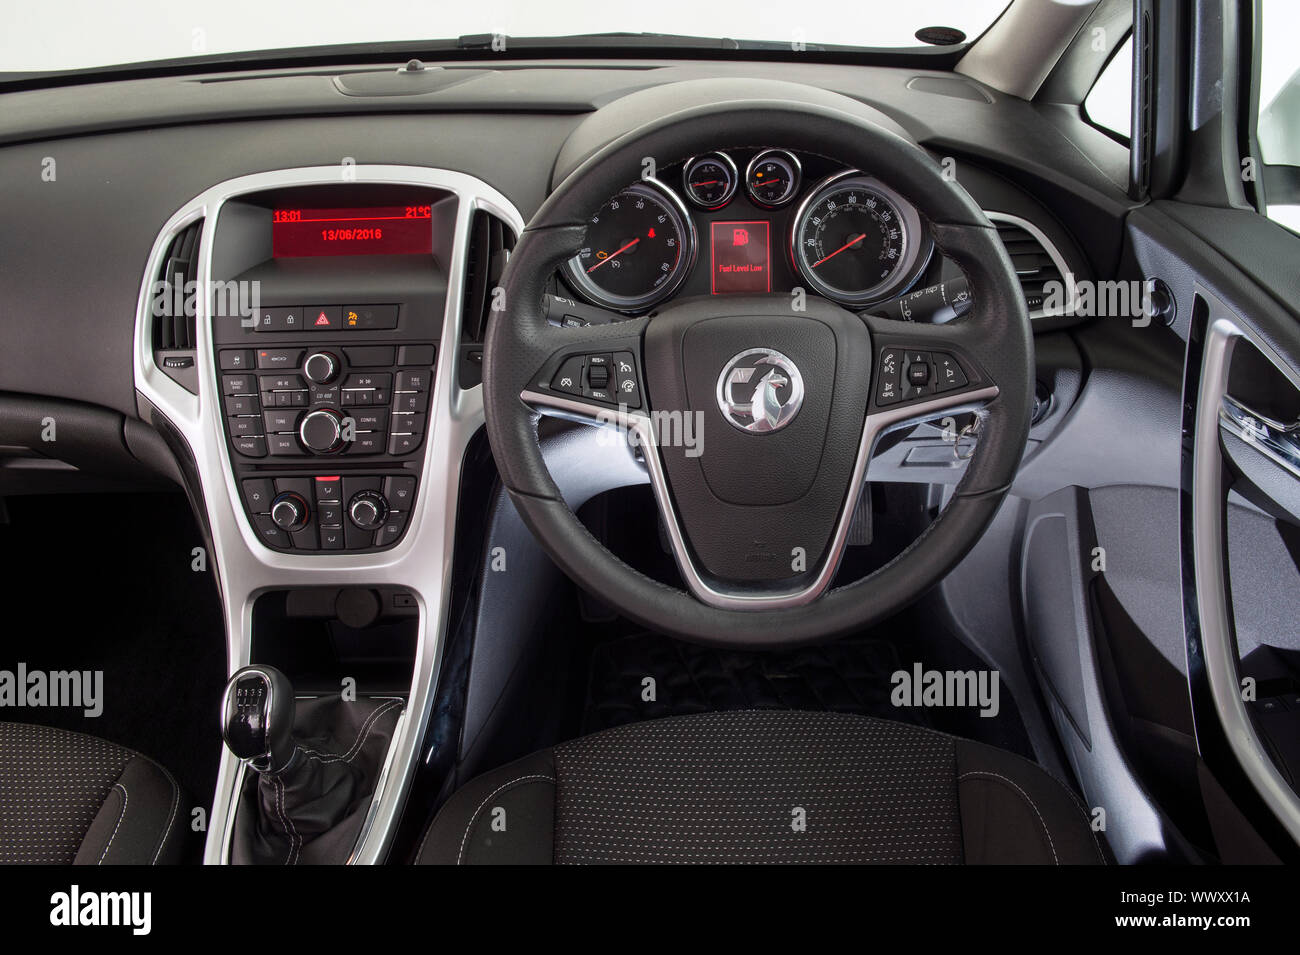 Aggregate more than 79 vauxhall astra 2013 interior